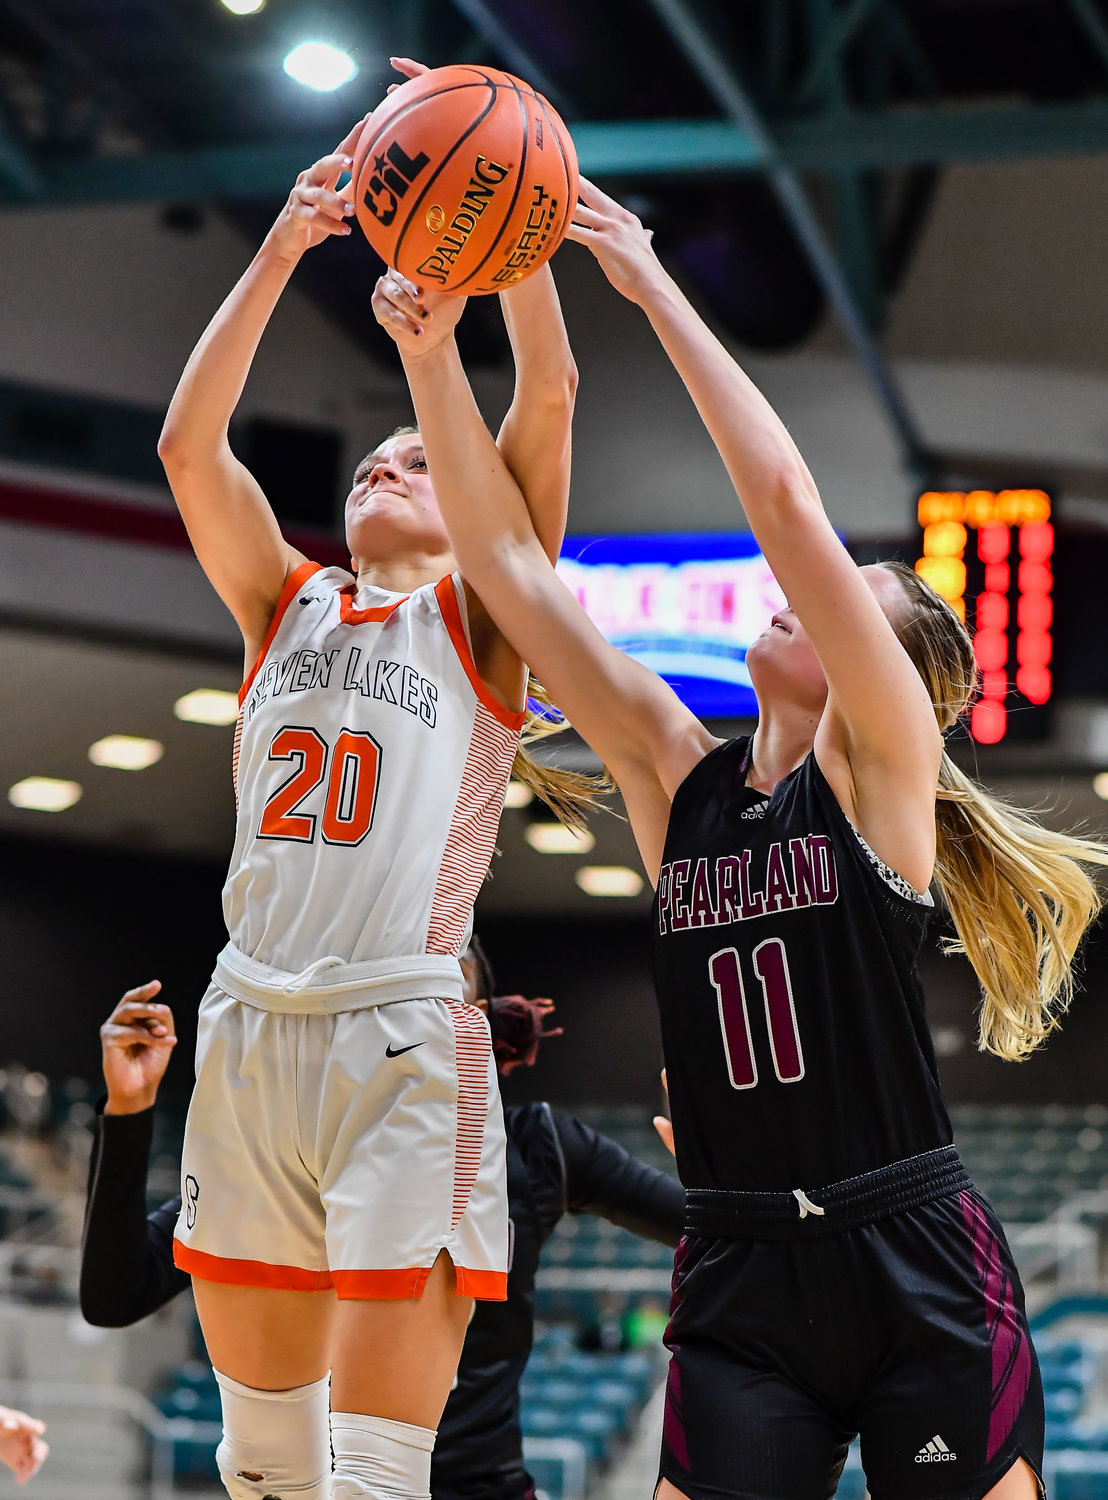 Katy Tx. Feb 25, 2022:  Seven Lakes Summer Halphen #20 and Pearlands Ashlynn Patrick #11 battle for the rebound during the Regional SemiFinal playoff game, Seven Lakes vs Pearland at the Merrell Center. (Photo by Mark Goodman / Katy Times)